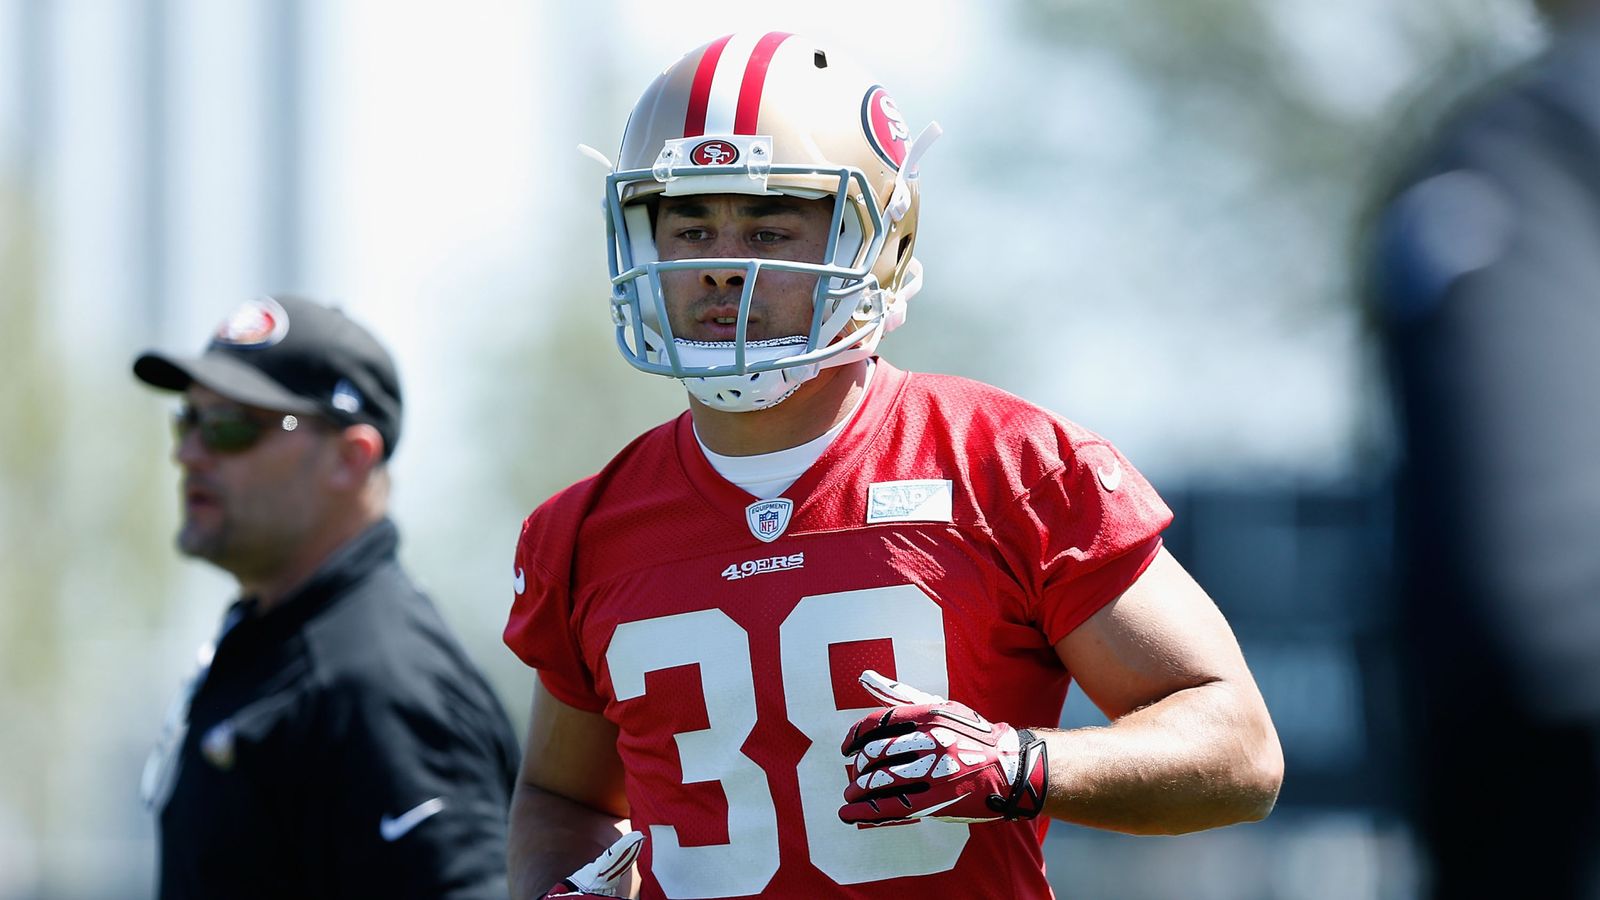 Jarryd Hayne ready for the big hits of the NFL, NFL News